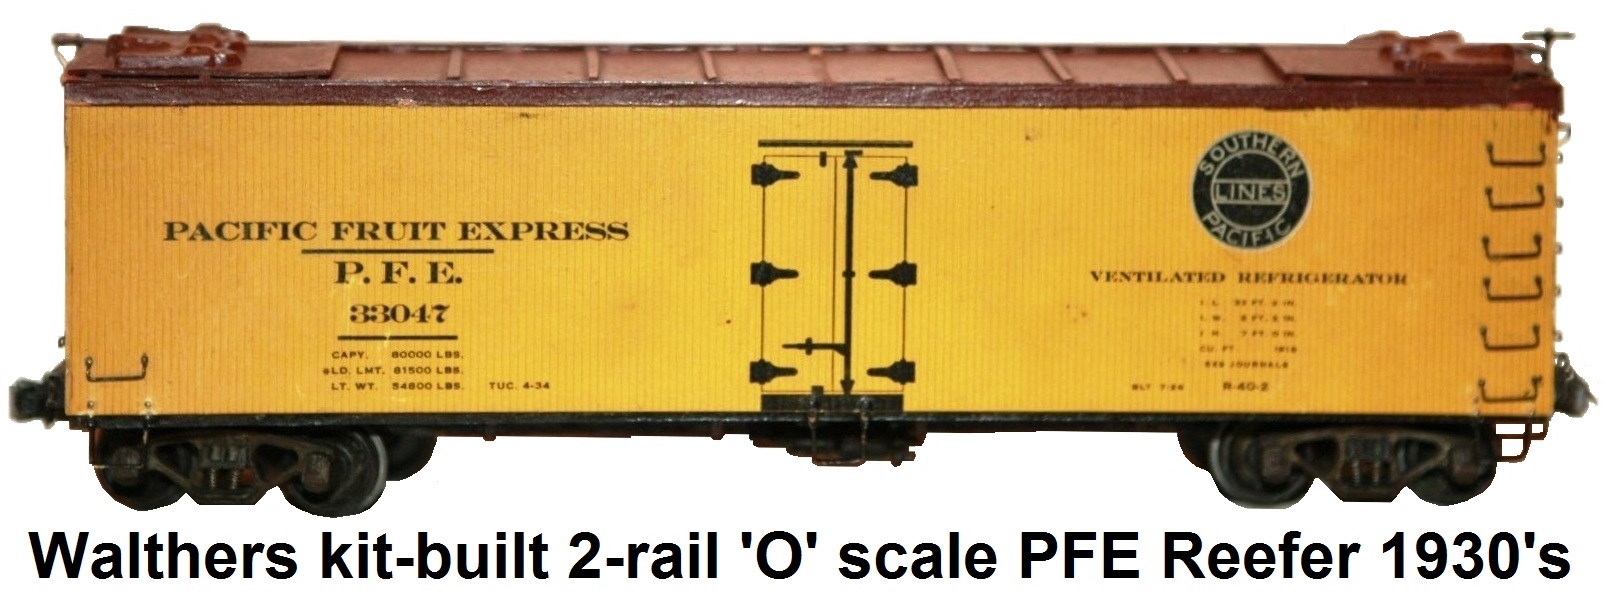 Walthers 'O' scale Pacific Fruit Express #33047 Reefer 1930'S era kit-built 2-rail with cast frame